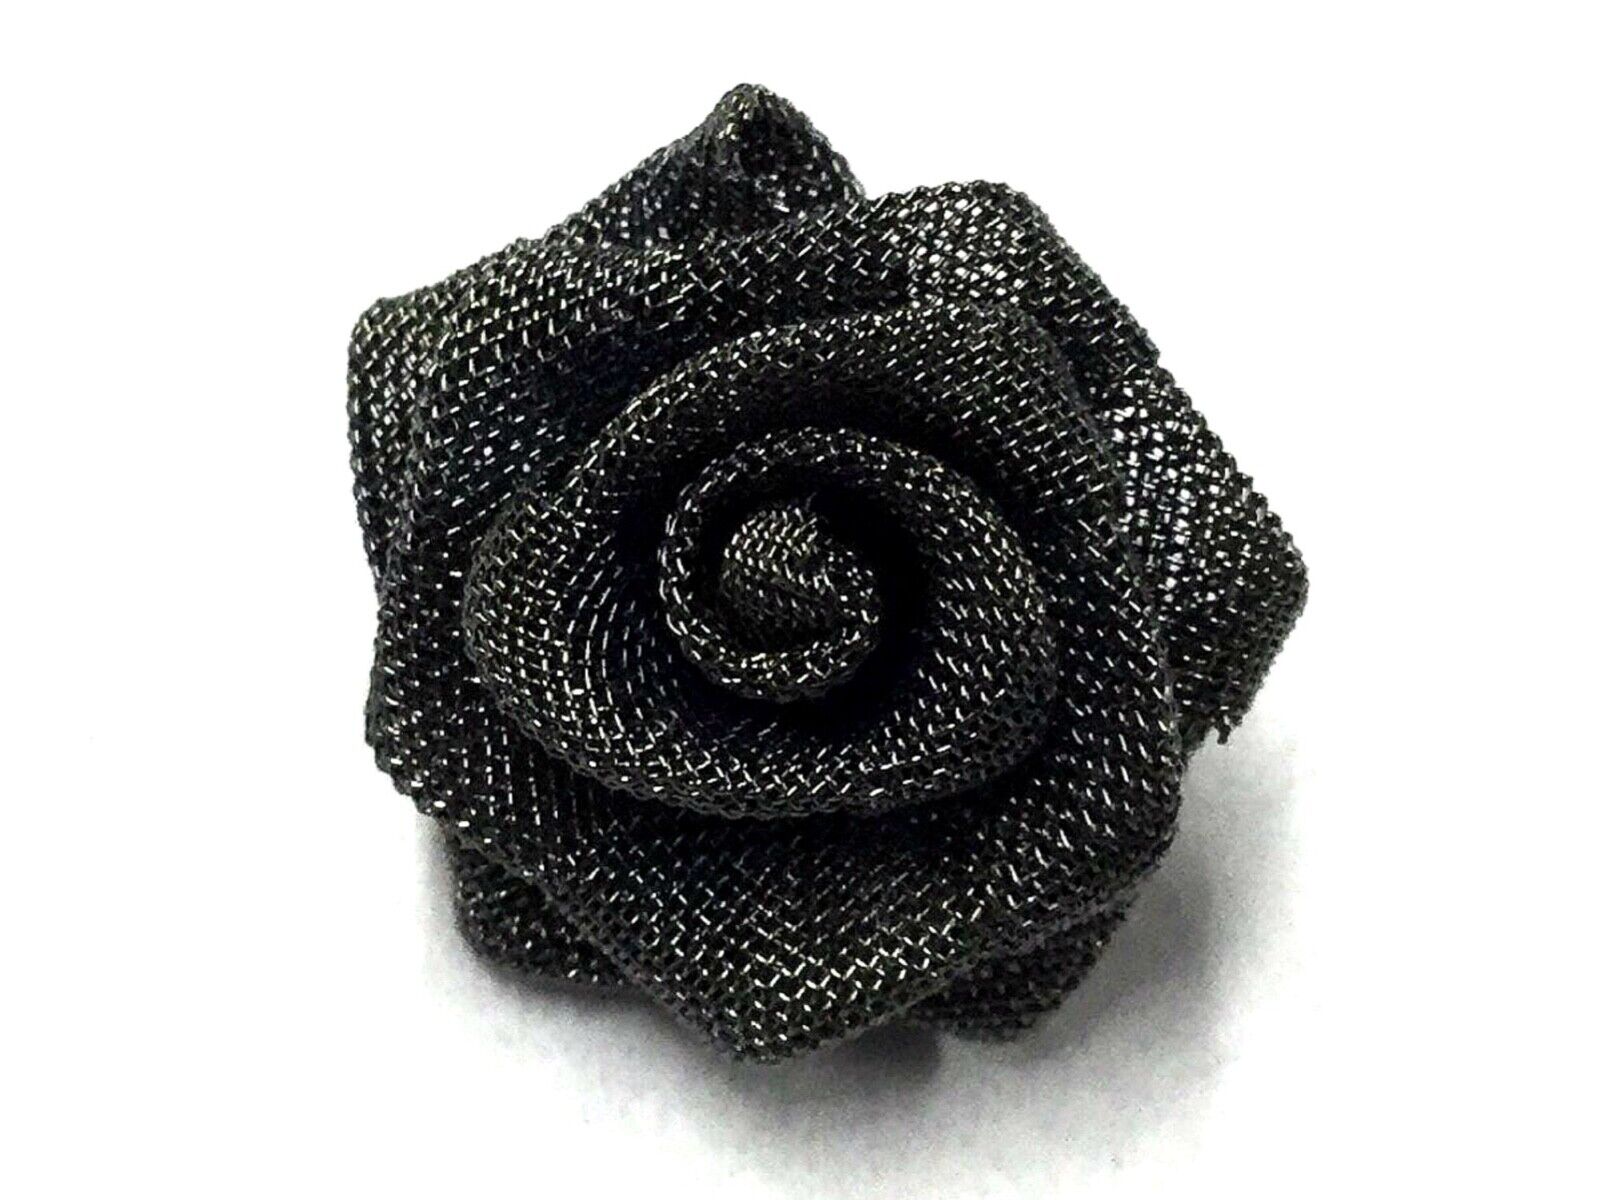 STUNNING NOS ITALY COUTURE Fine Metal Mesh Rose Flower Sewing Button S89